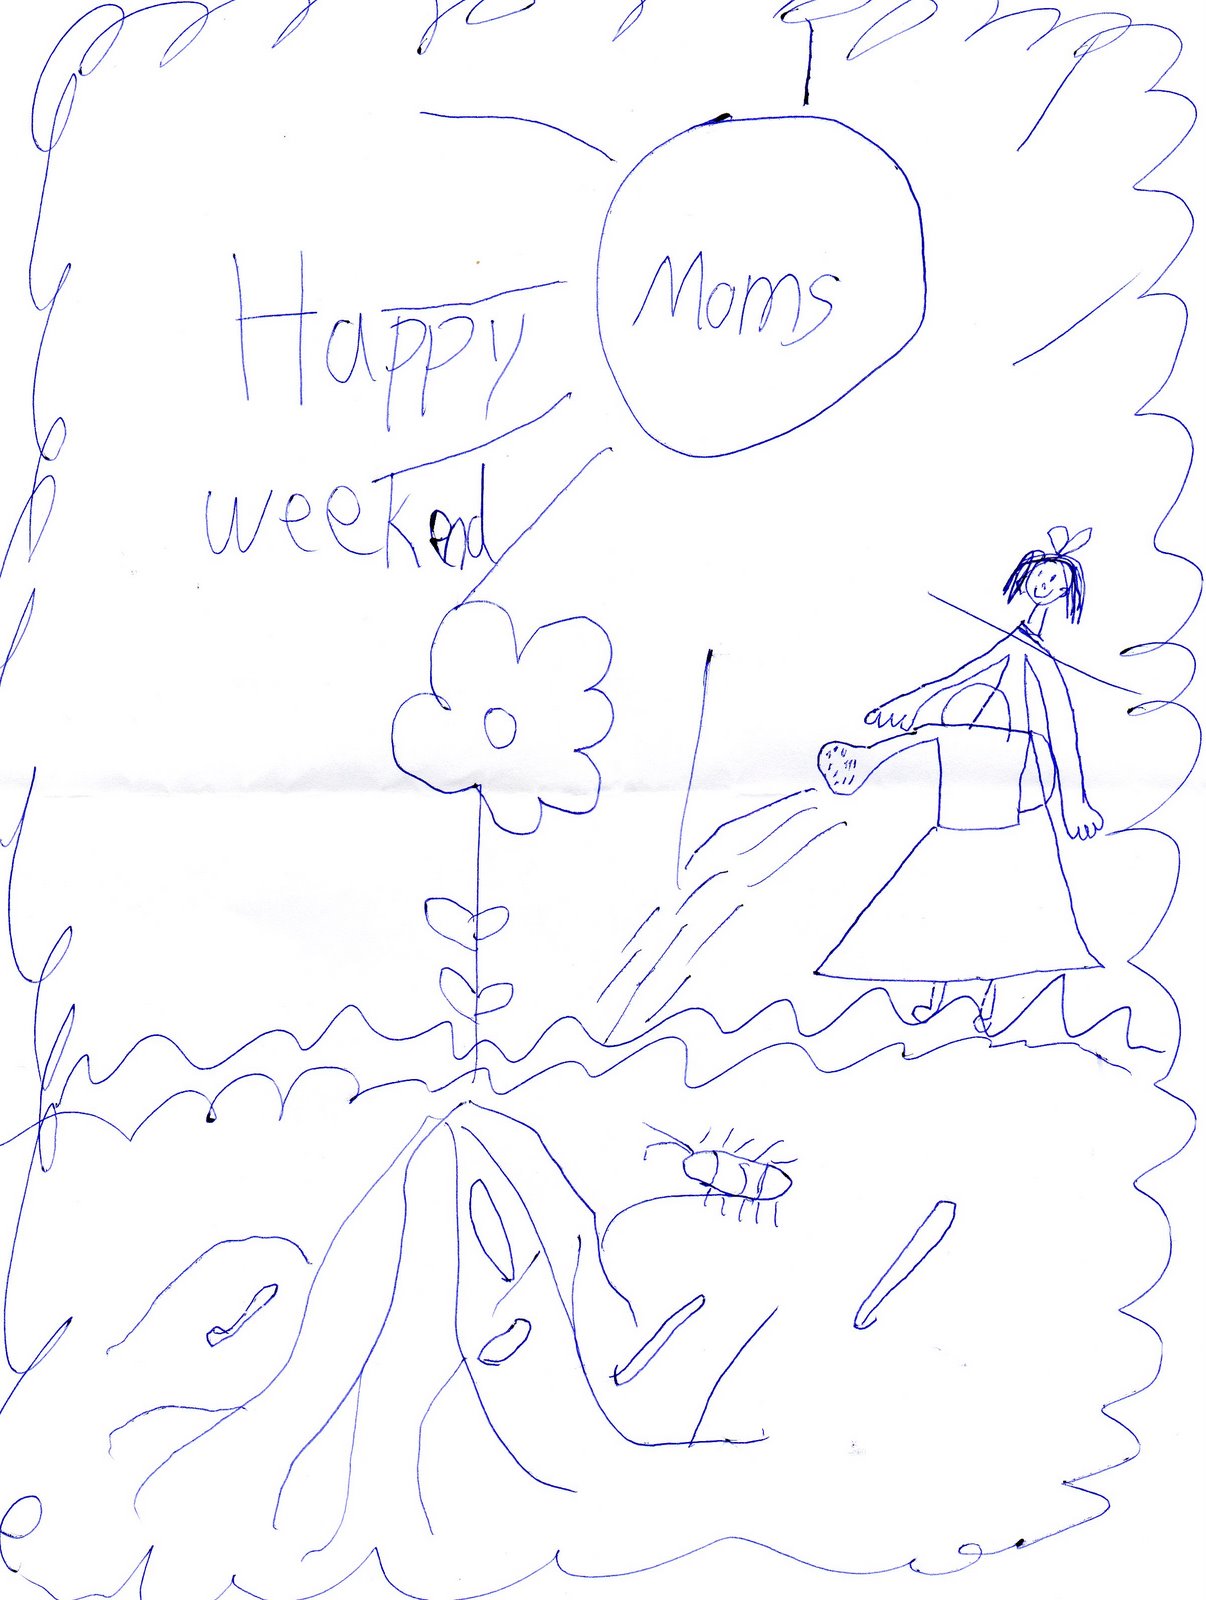 [mother's+day+note+3.jpg]